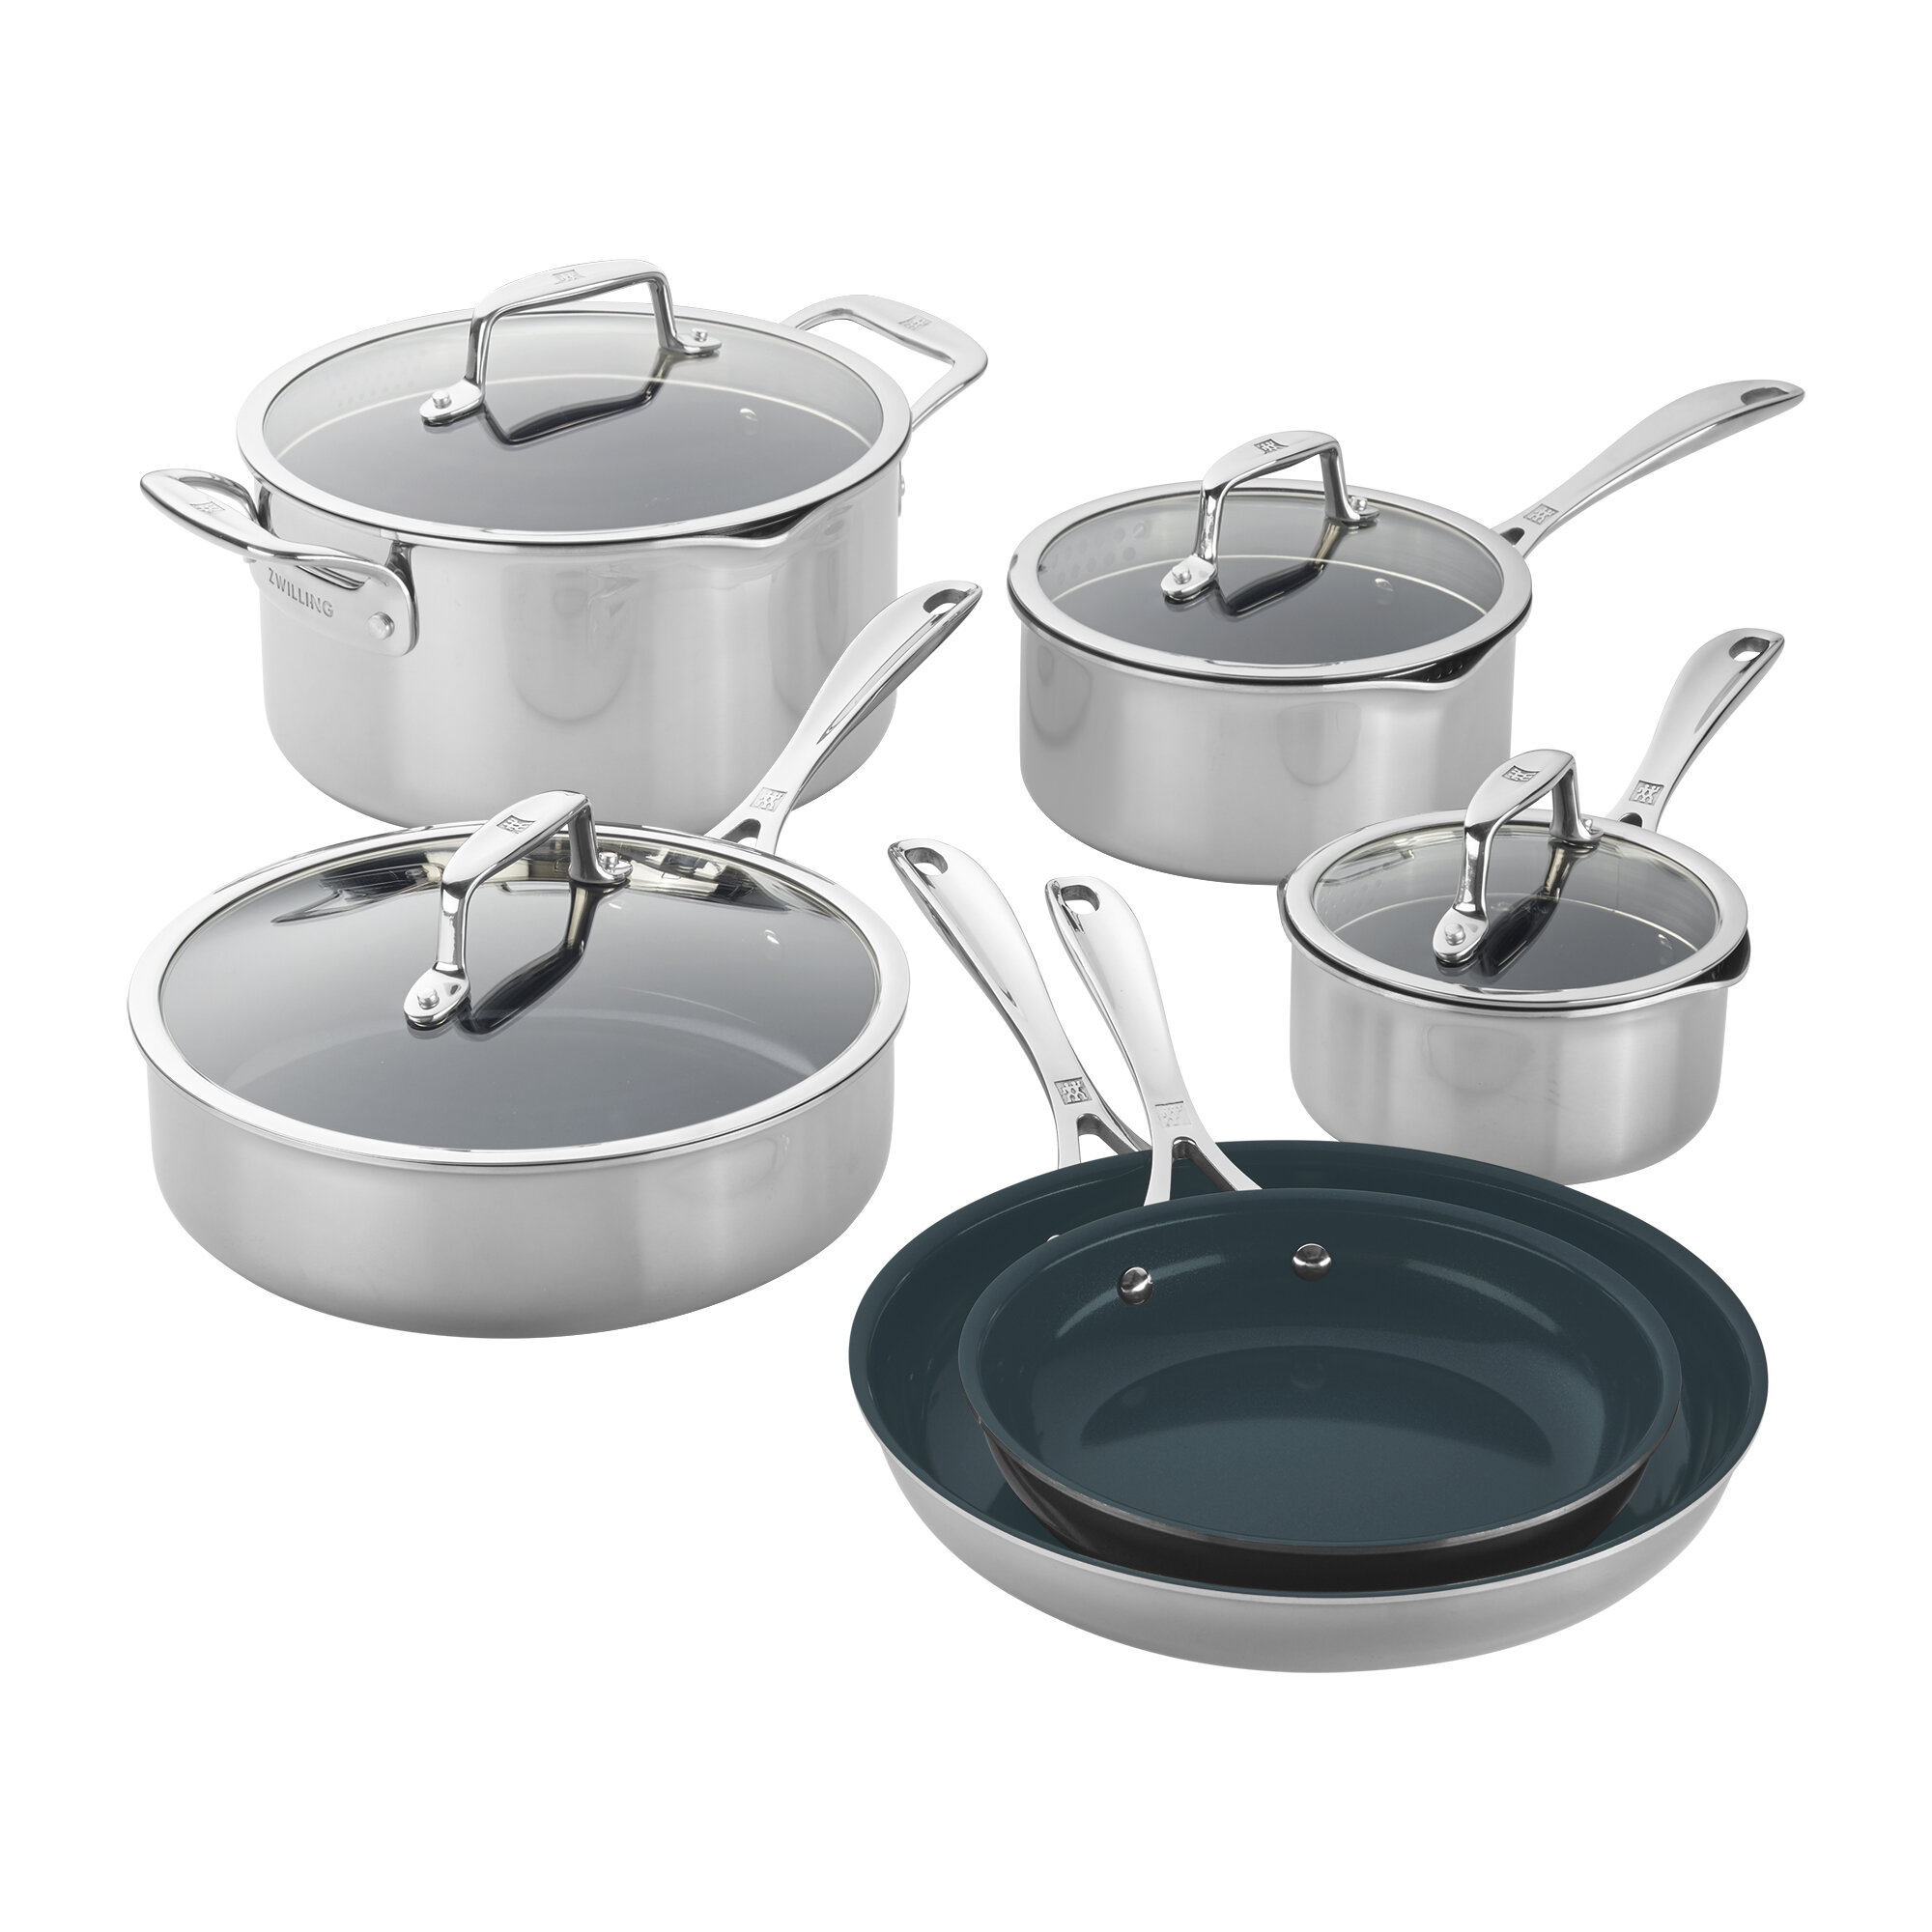 Zwilling Non-Stick Pots and Pans – Fixtures Close Up